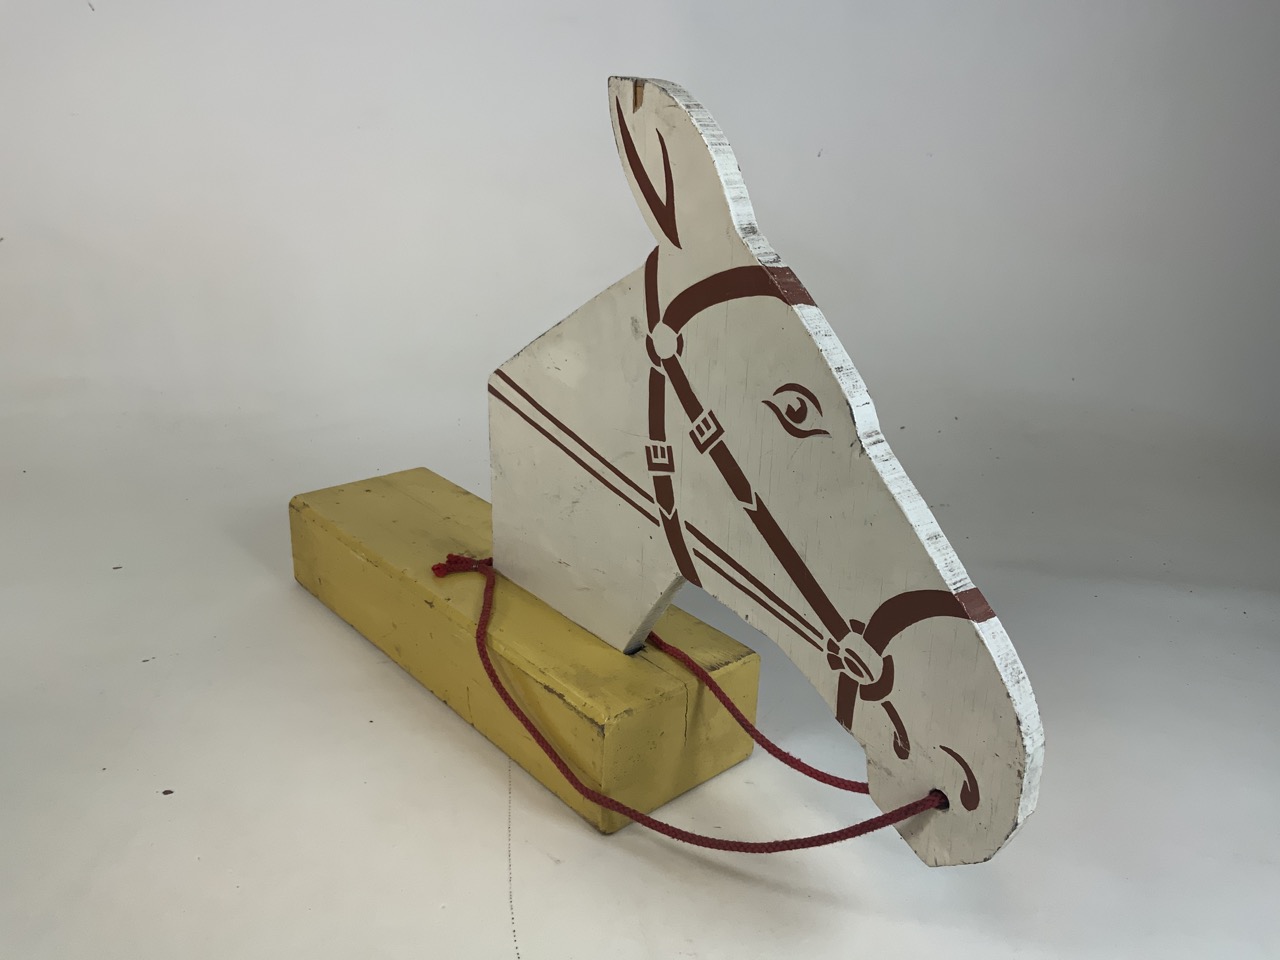 A wooden donkey head - for advertising donkey rides. - Image 2 of 3